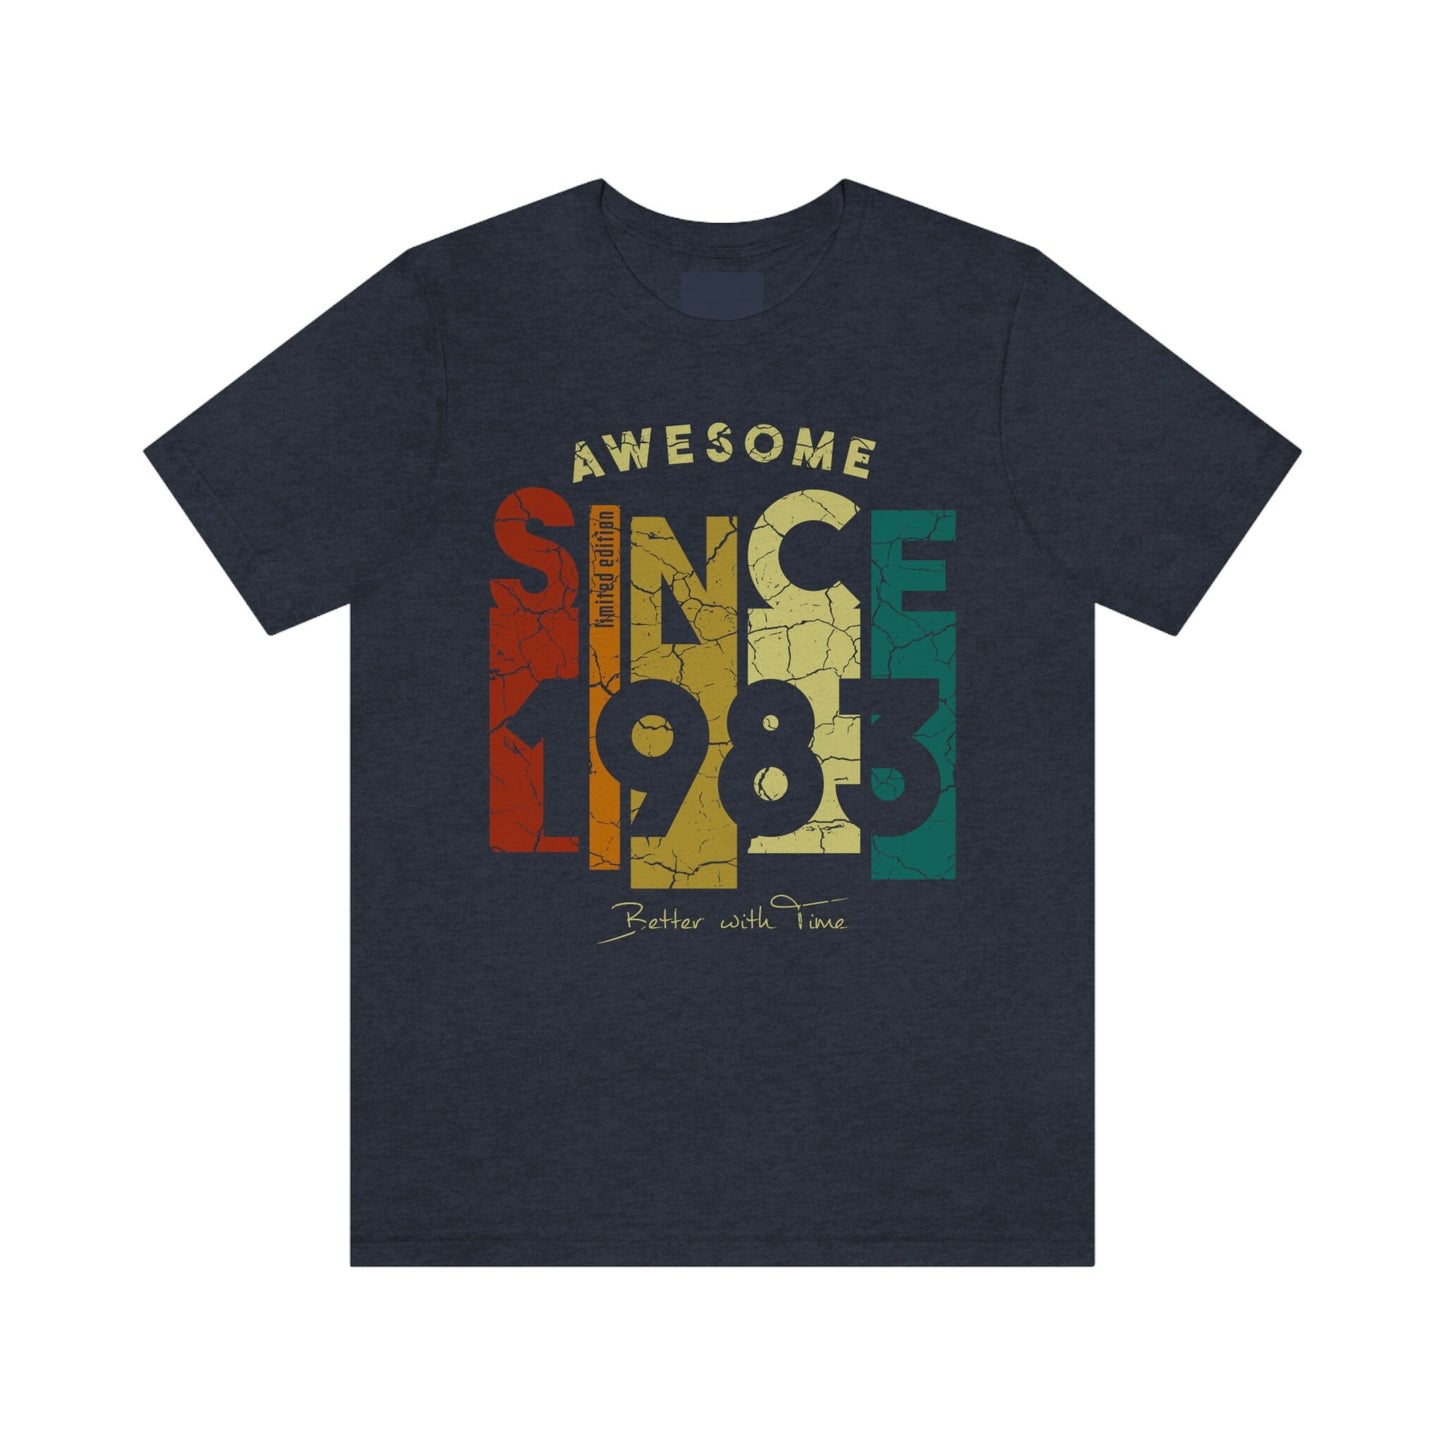 Awesome Since 1983 birthday gift t-shirt for women or men,  40 anniversary t-shirt for wife or husband